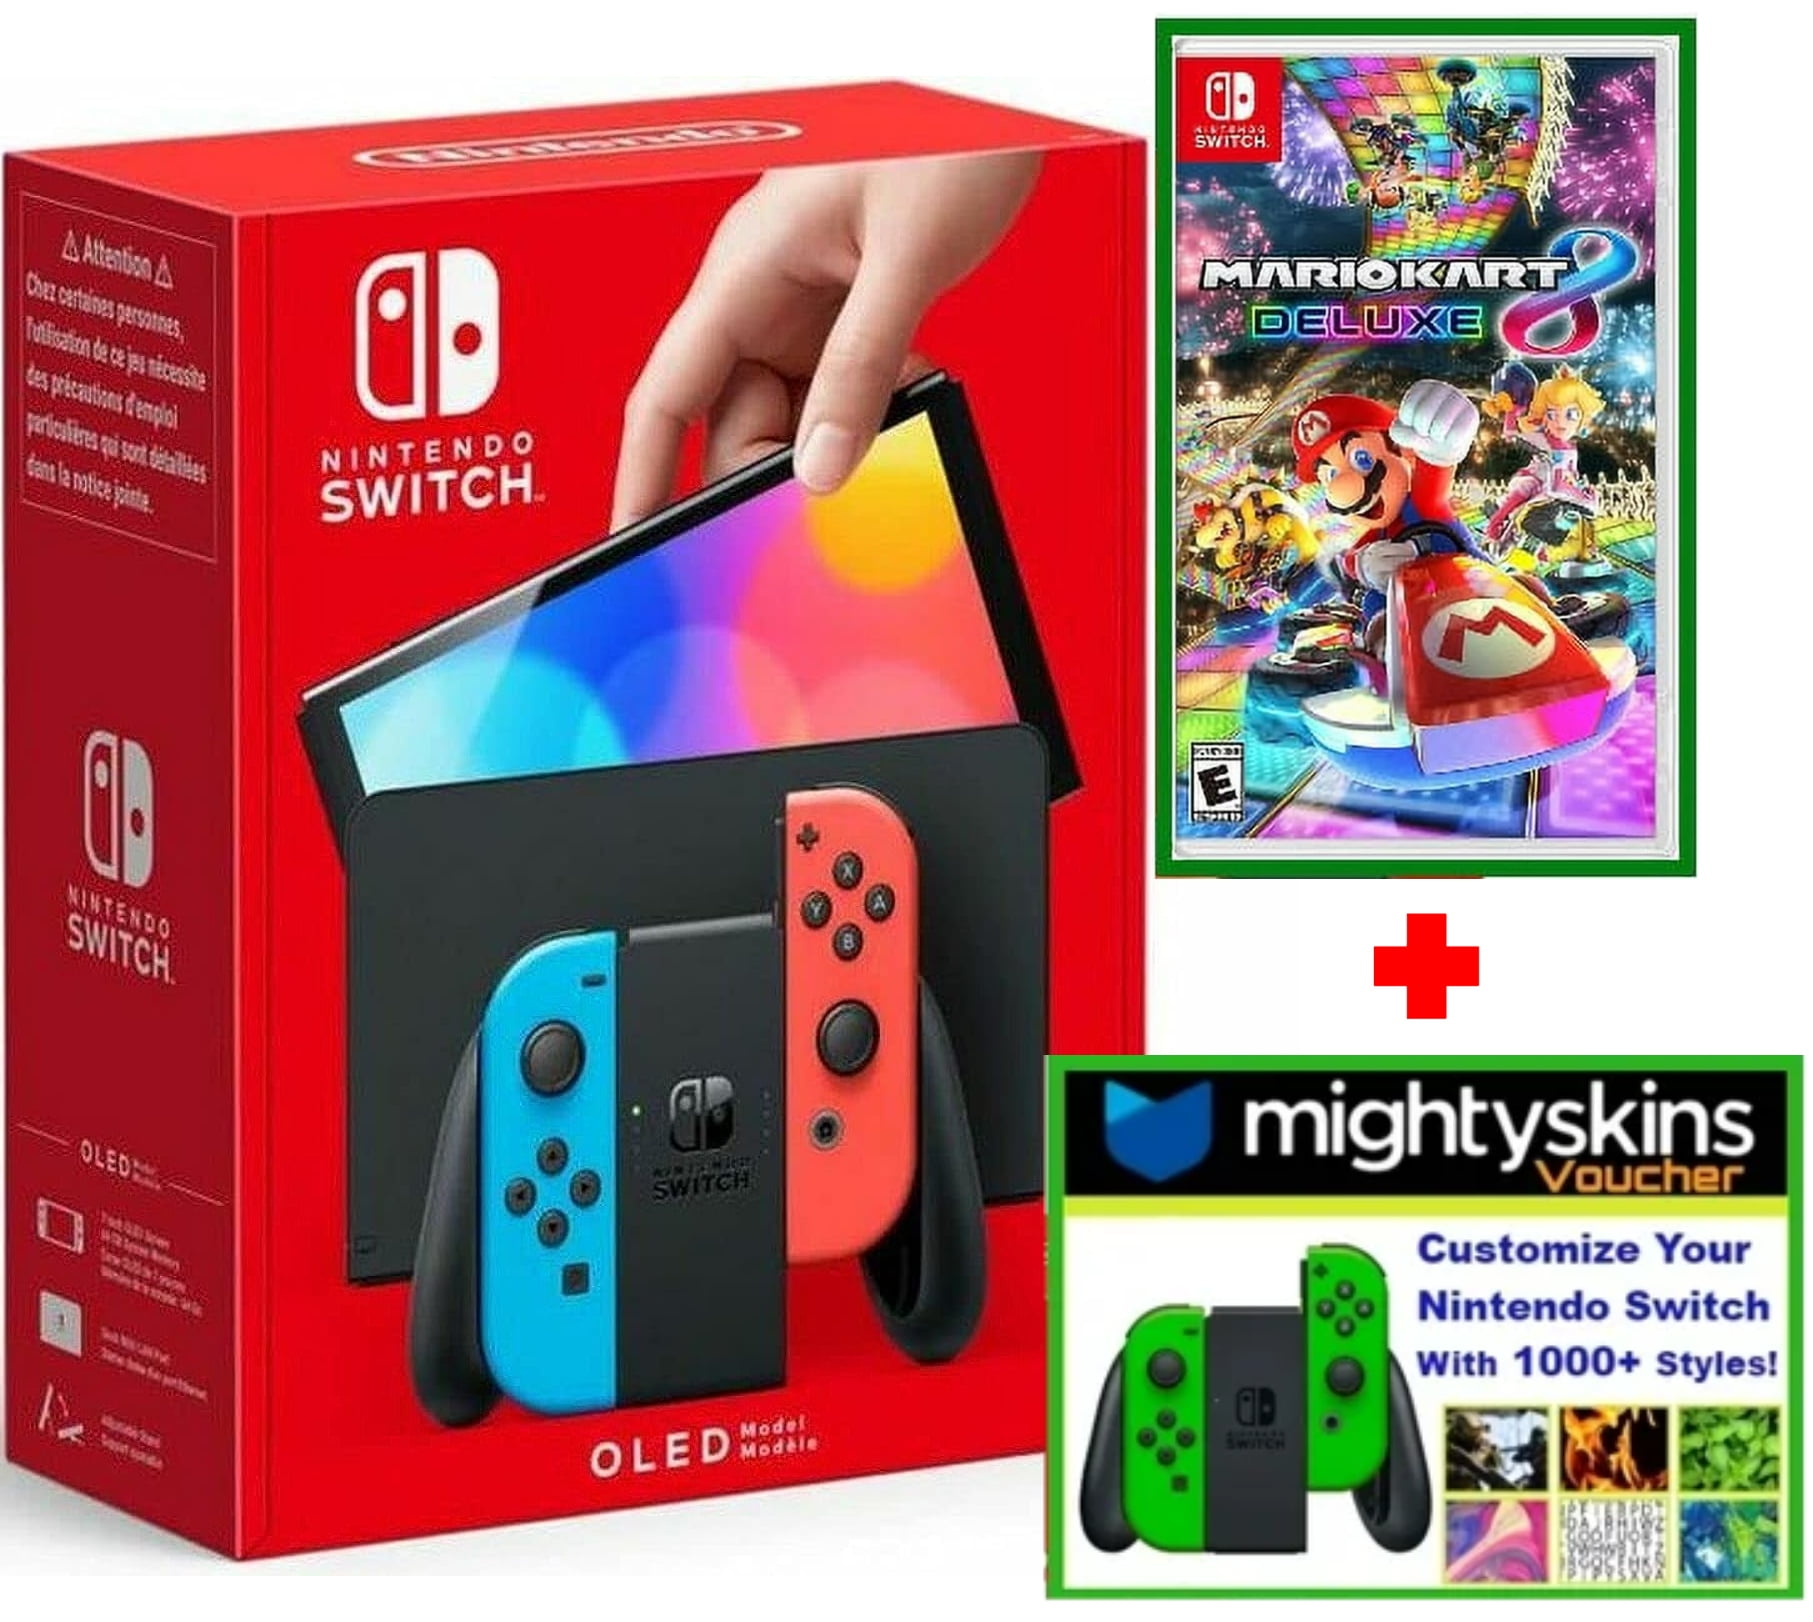 Nintendo Switch OLED Model w/ Neon Red & Neon Blue Joy-Con Console with Mario  Kart 8 Deluxe Game & Mightyskins Voucher - Limited Bundle - Import with US  Plug